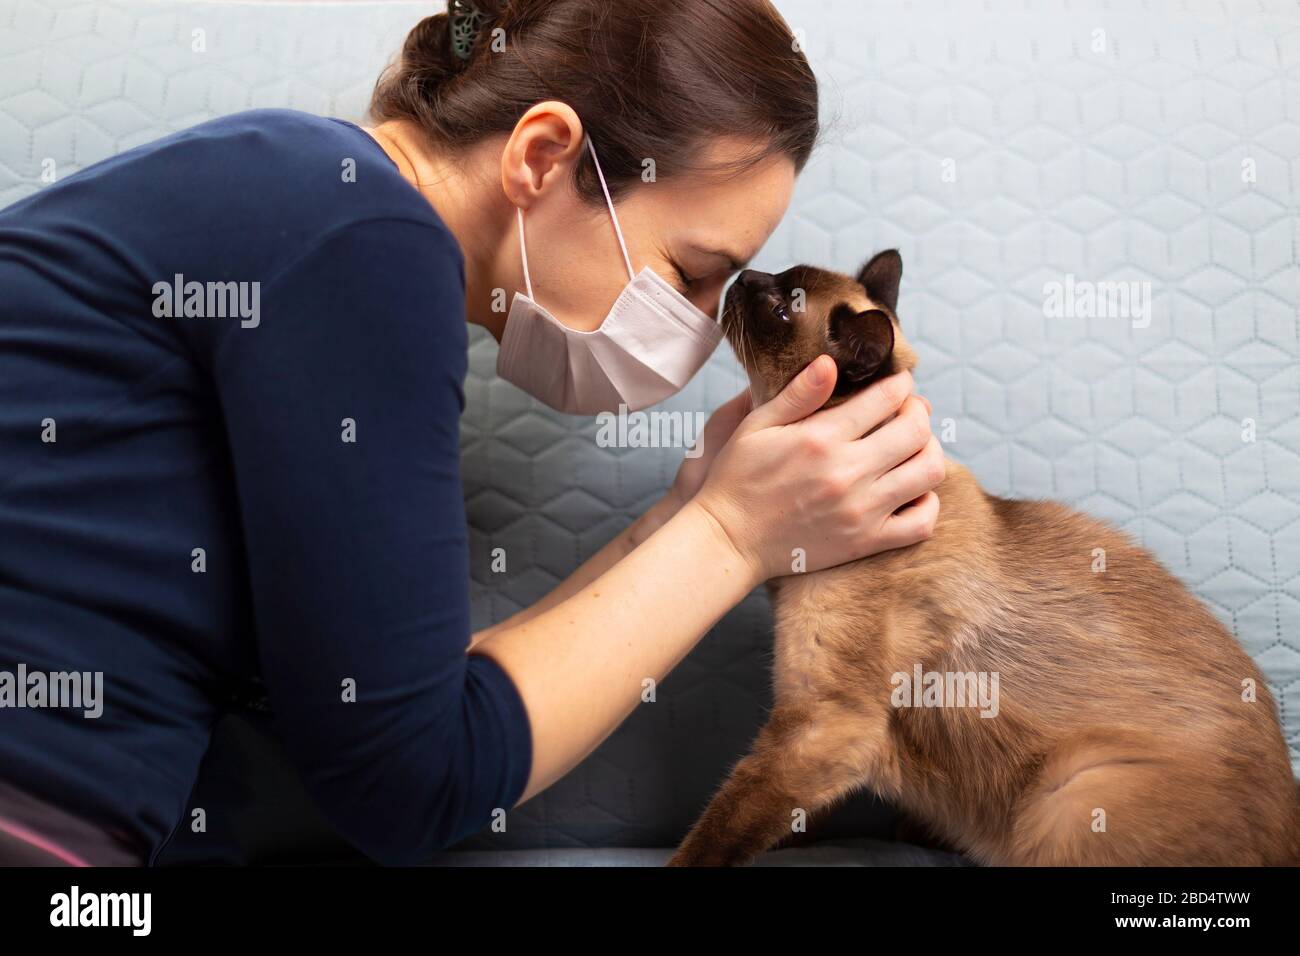 Woman in self isolation mask with her cat having a moment of affection. Isolation and self-quarantine. Stock Photo